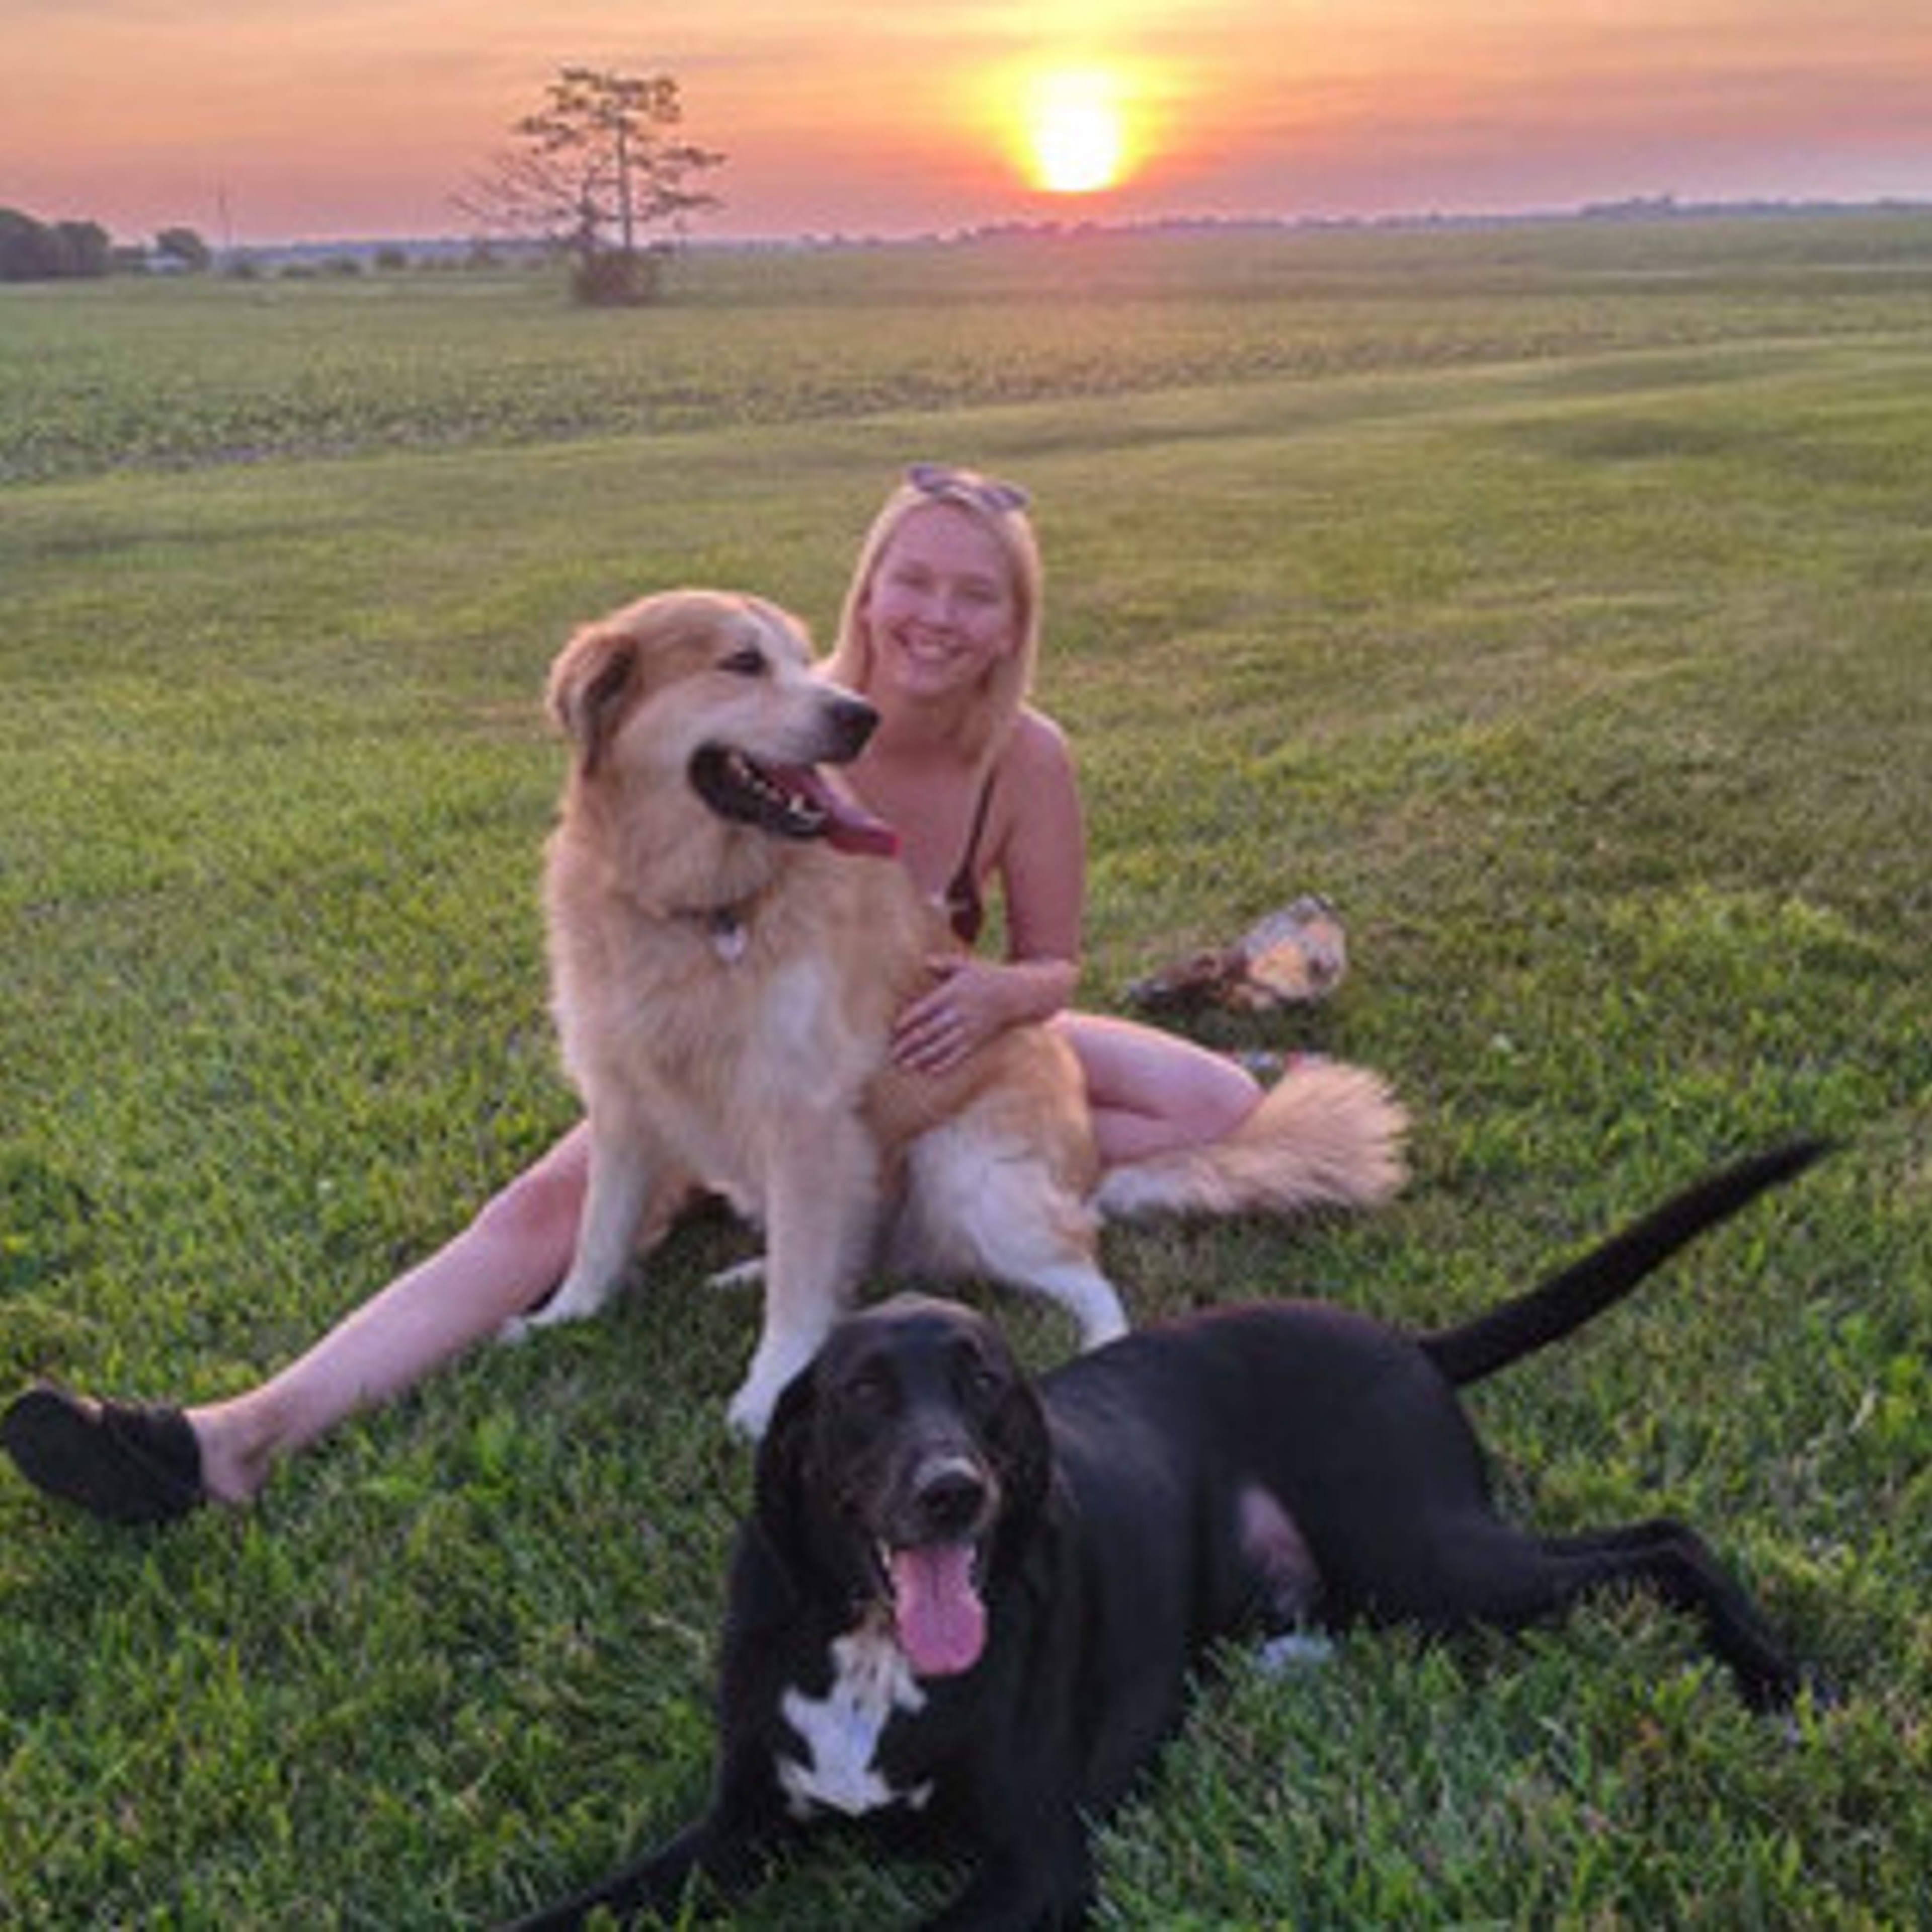 Hello! I am reliable pet sitter who loves all animals as they are my own. I’ve been in this business for about 3 years!